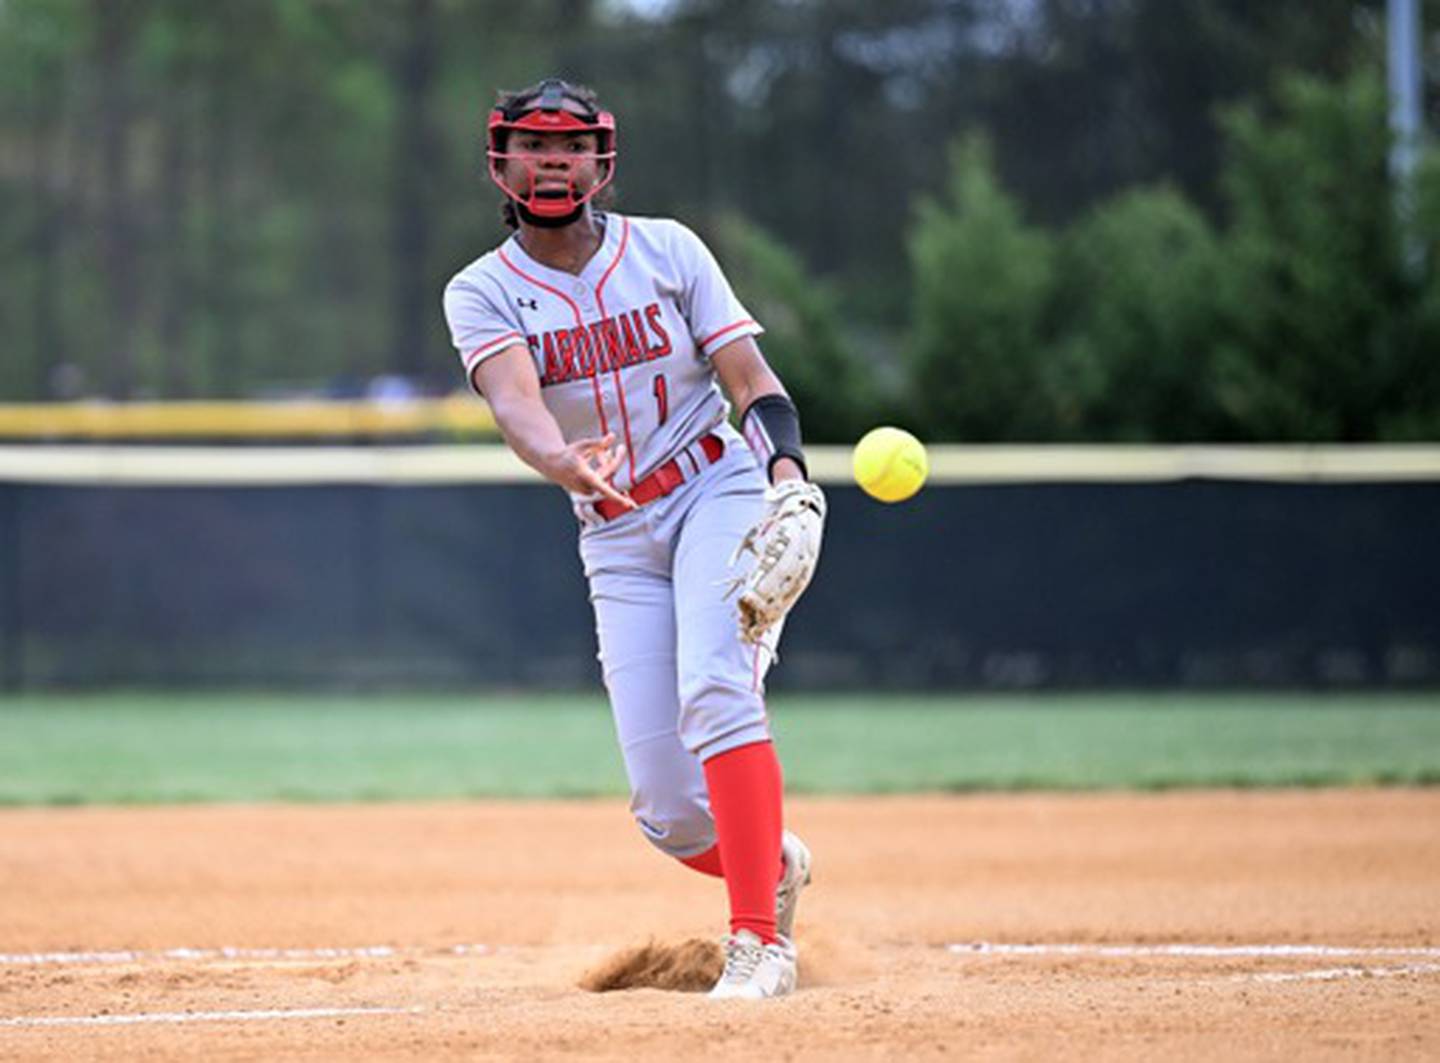 Kristin White was dominant for Crofton's softball team Thursday. The senior, bound to Delaware State University, struck out 17 in a complete game 3-hit pitching effort and finished 2-for-3 with 2 RBI as the fourth-ranked Cardinals handed No. 11 Arundel its first loss, 4-0, in Anne Arundel County action.